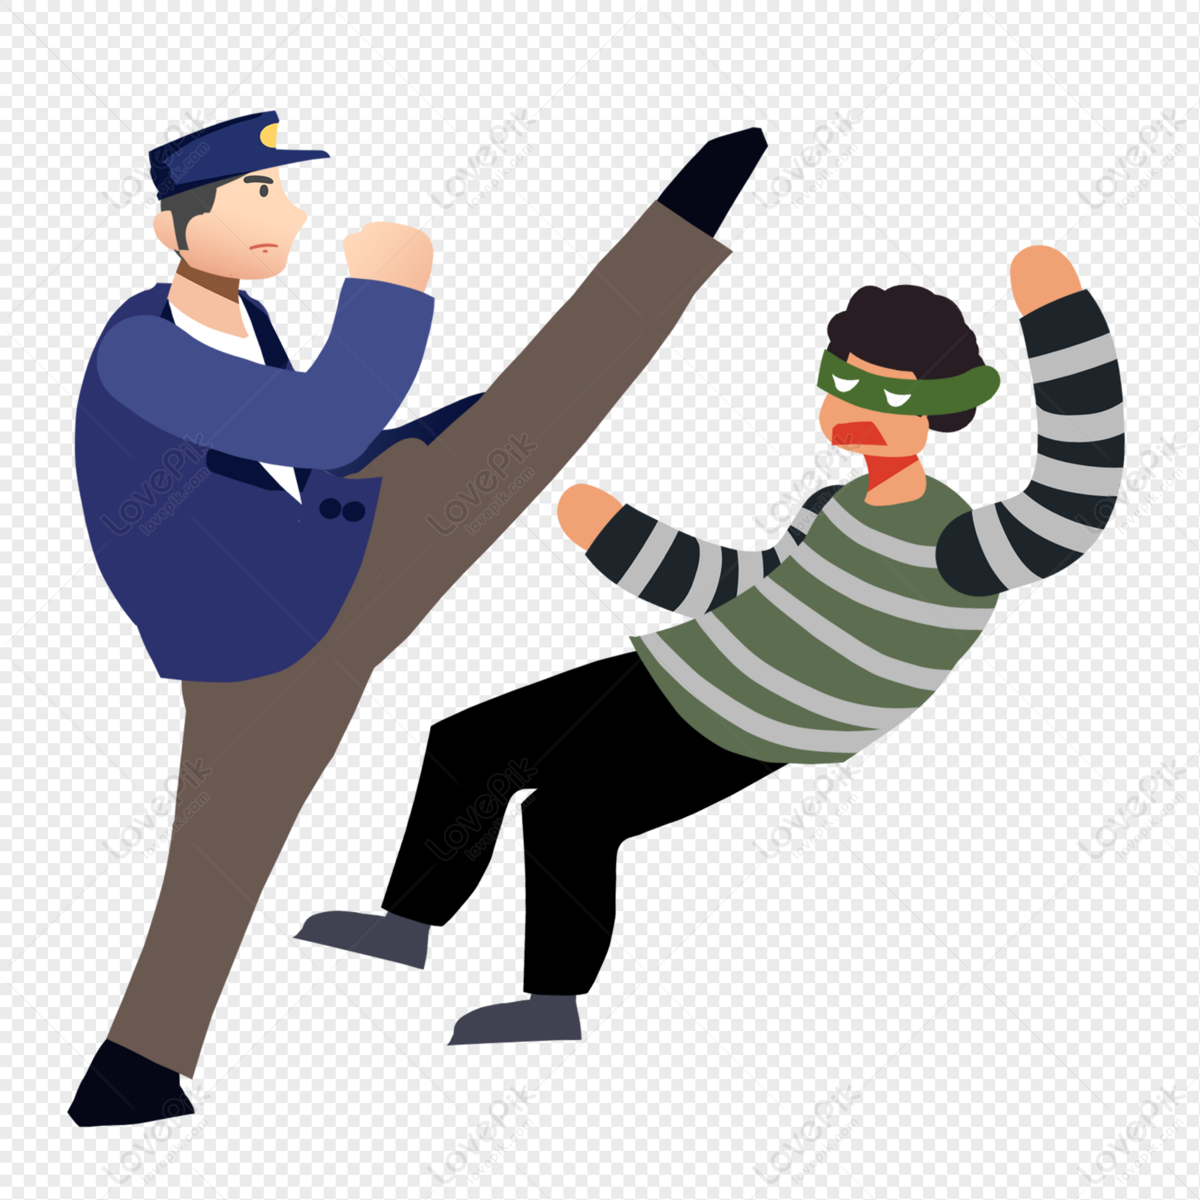 Policeman Who Catches Bad People PNG Image Free Download And Clipart Image  For Free Download - Lovepik | 401481631